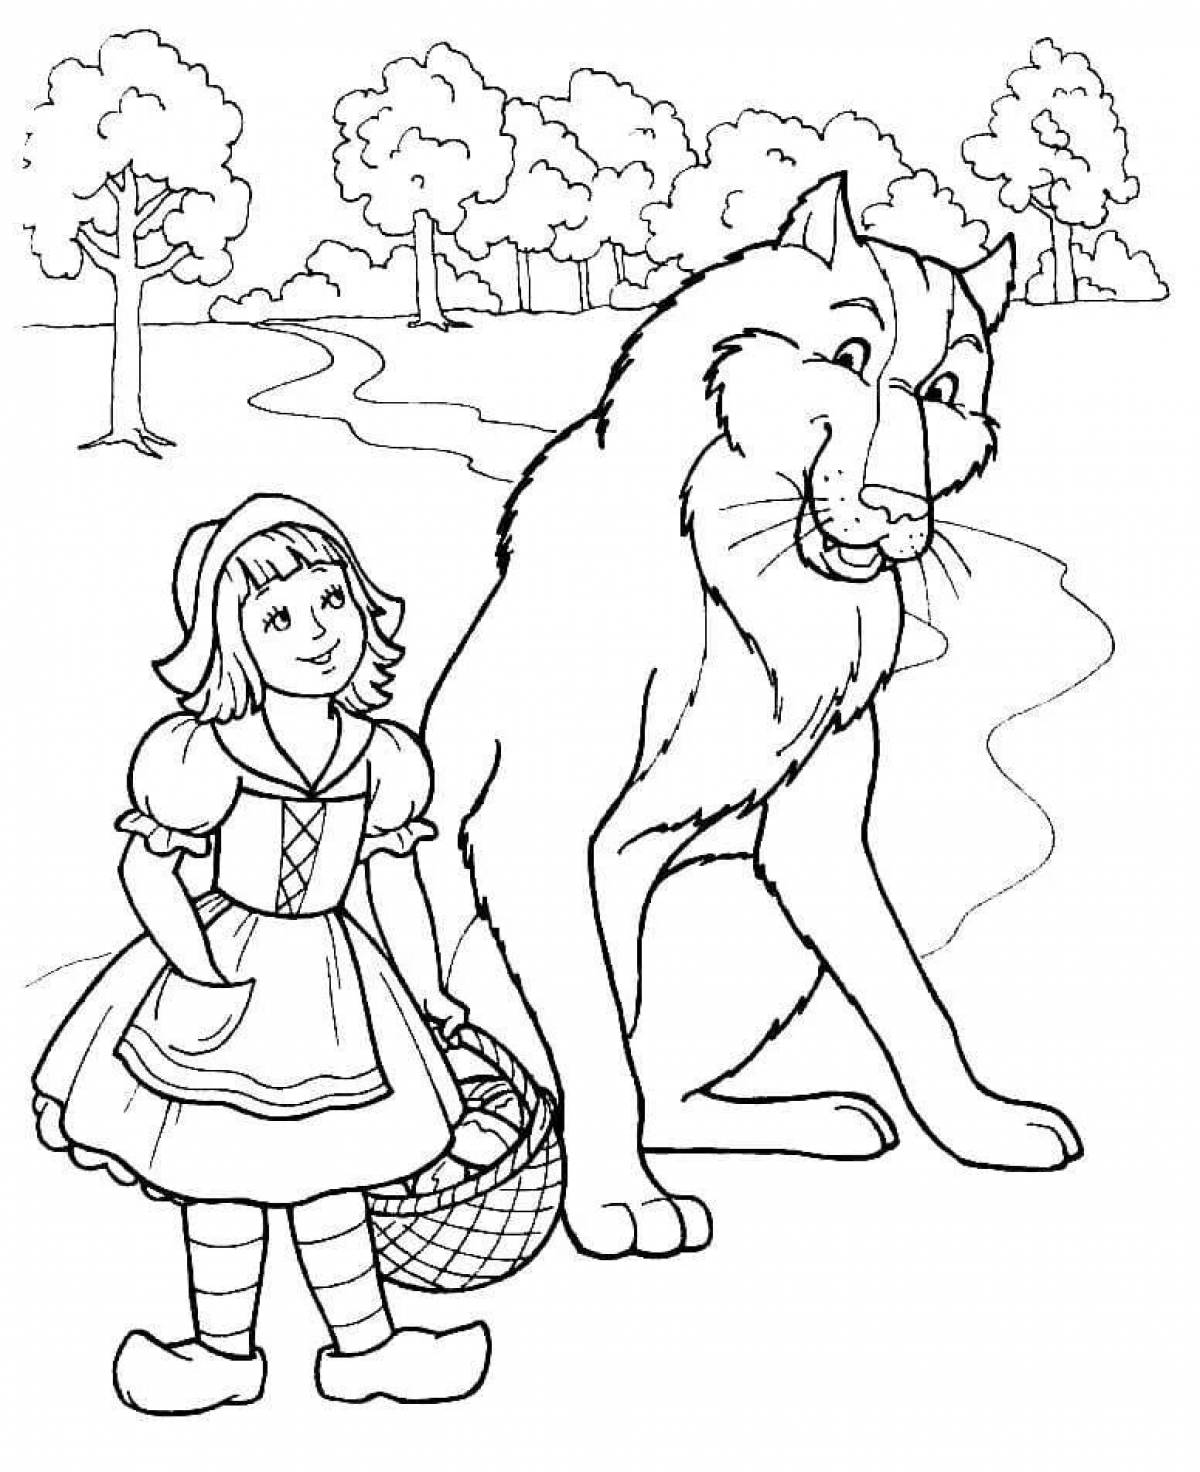 Wolf and little red riding hood #8